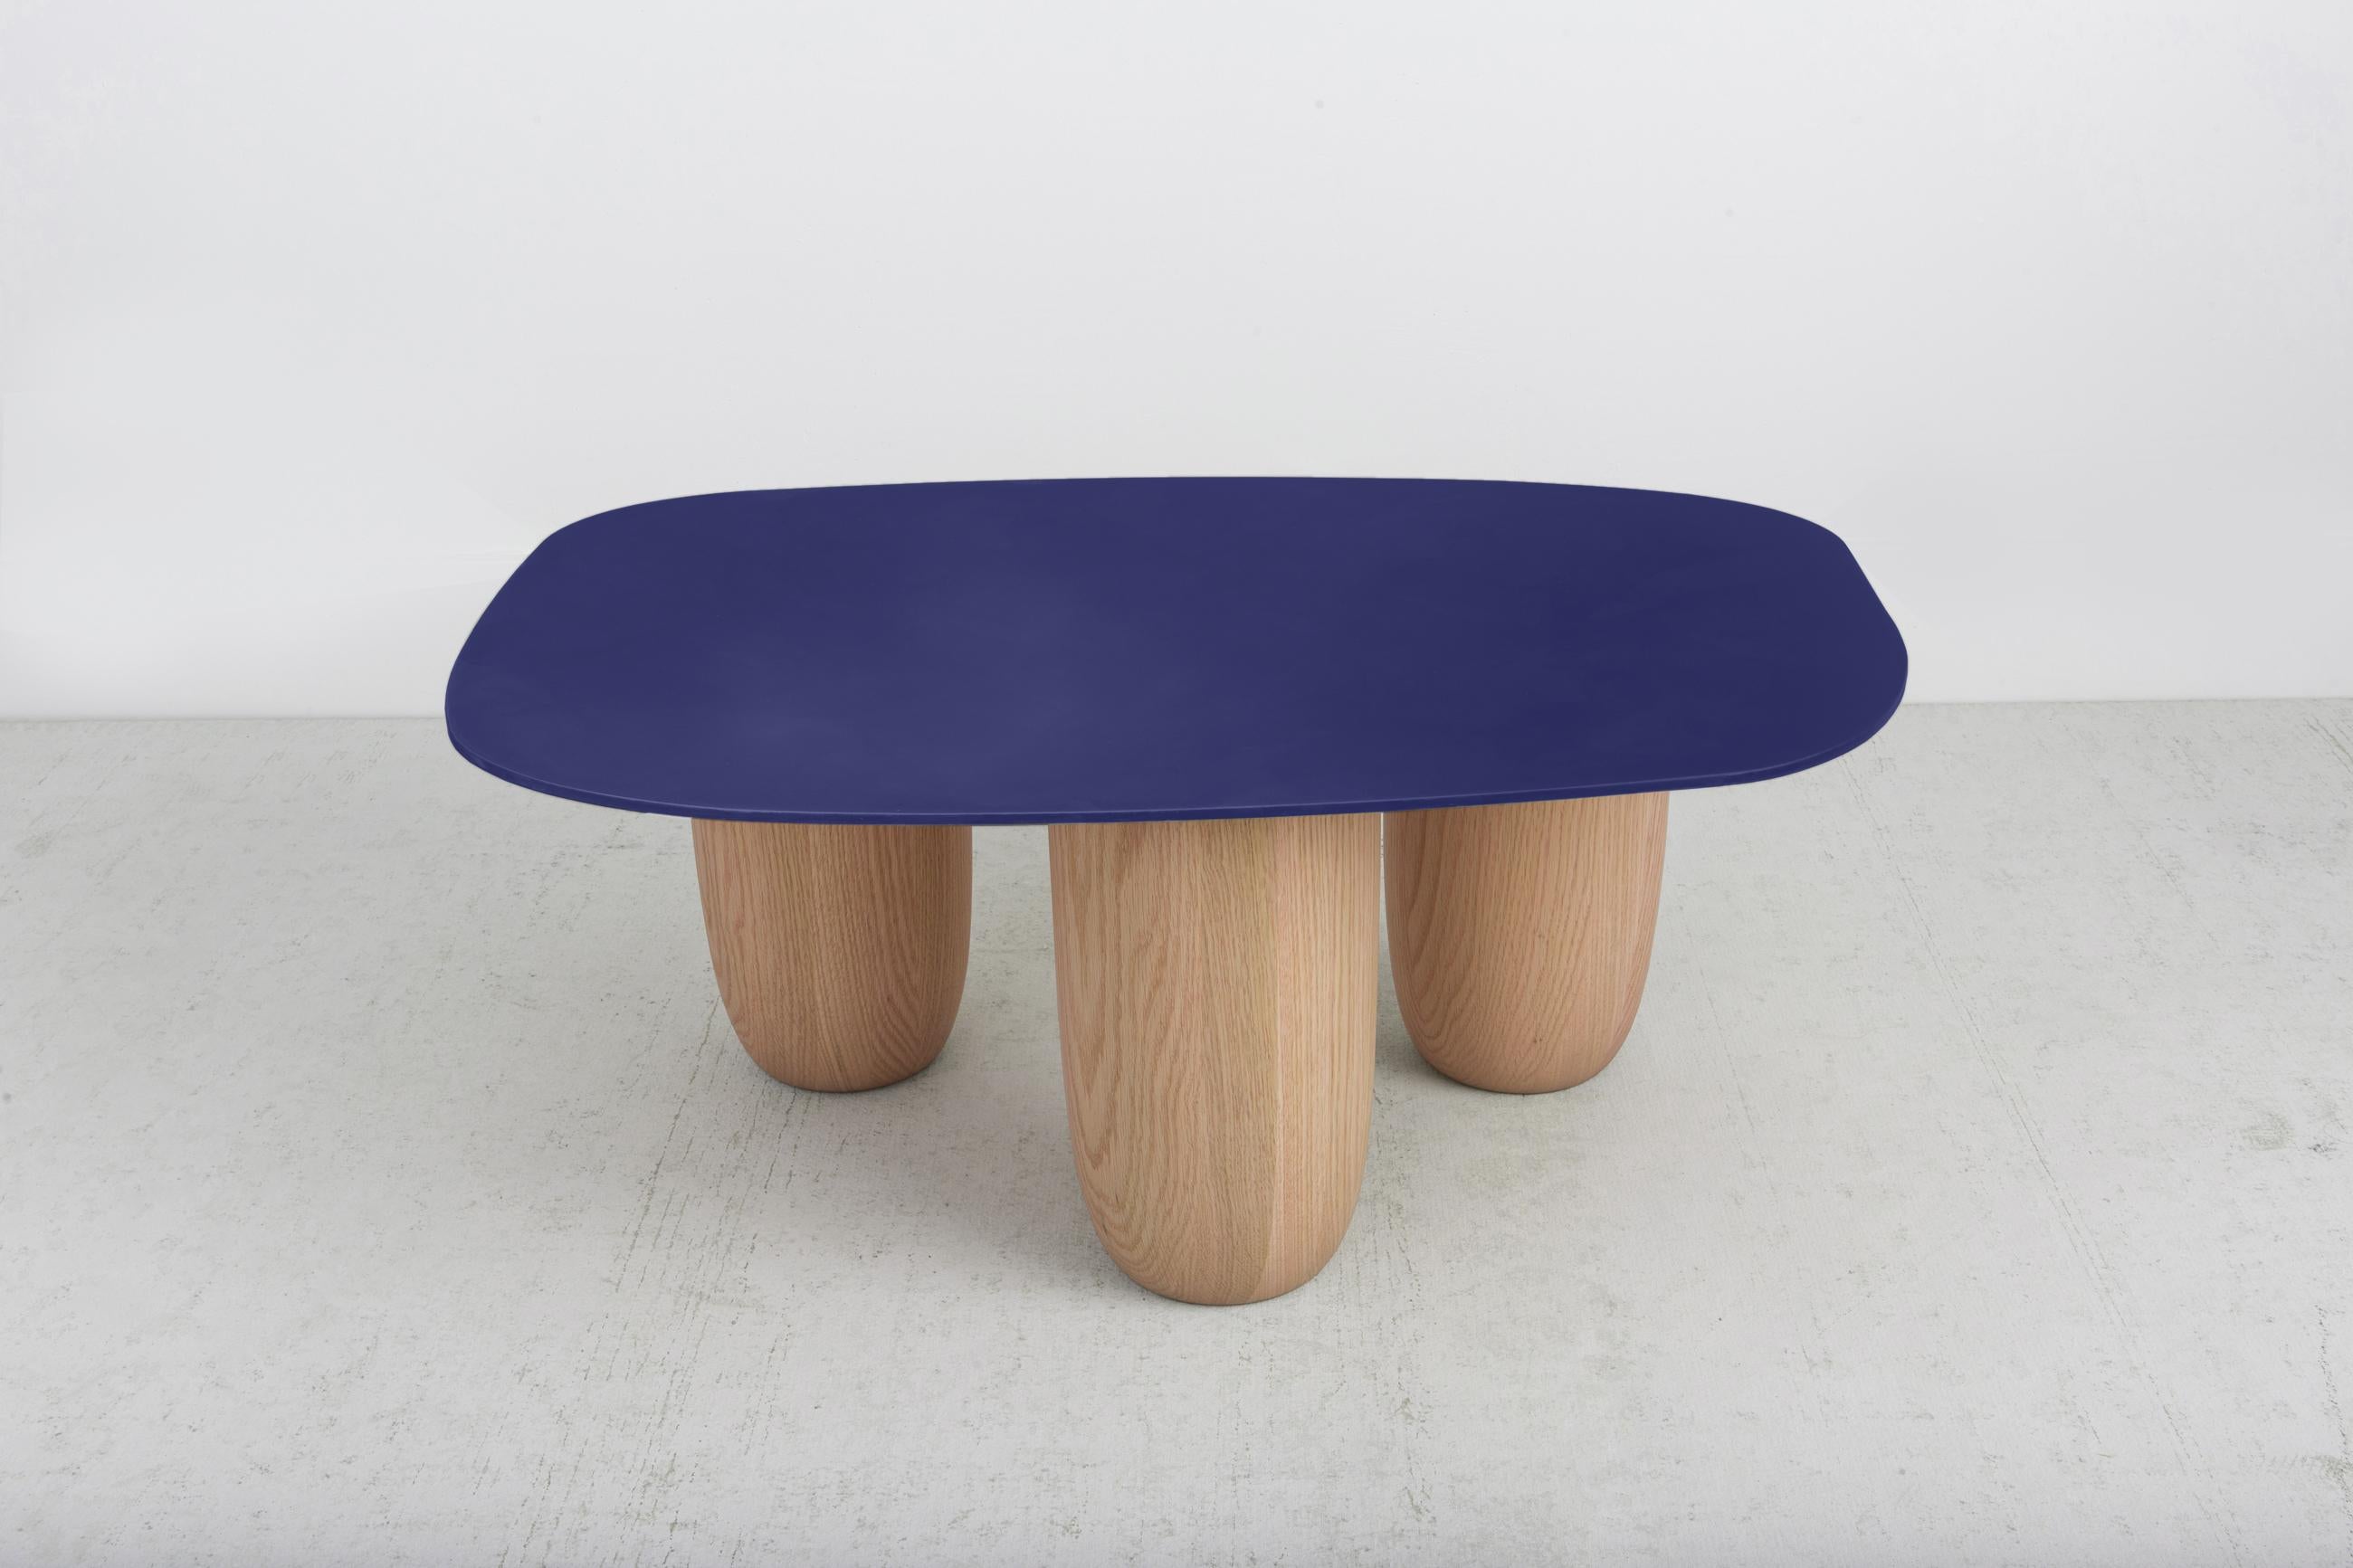 Our contemporary low Sumo tables in steel and solid oak are now offered in various finishes. The original Sumo tables were introduced at Design Miami 2020. This design was influenced by Japanese minimalist aesthetics and very much inspired by the